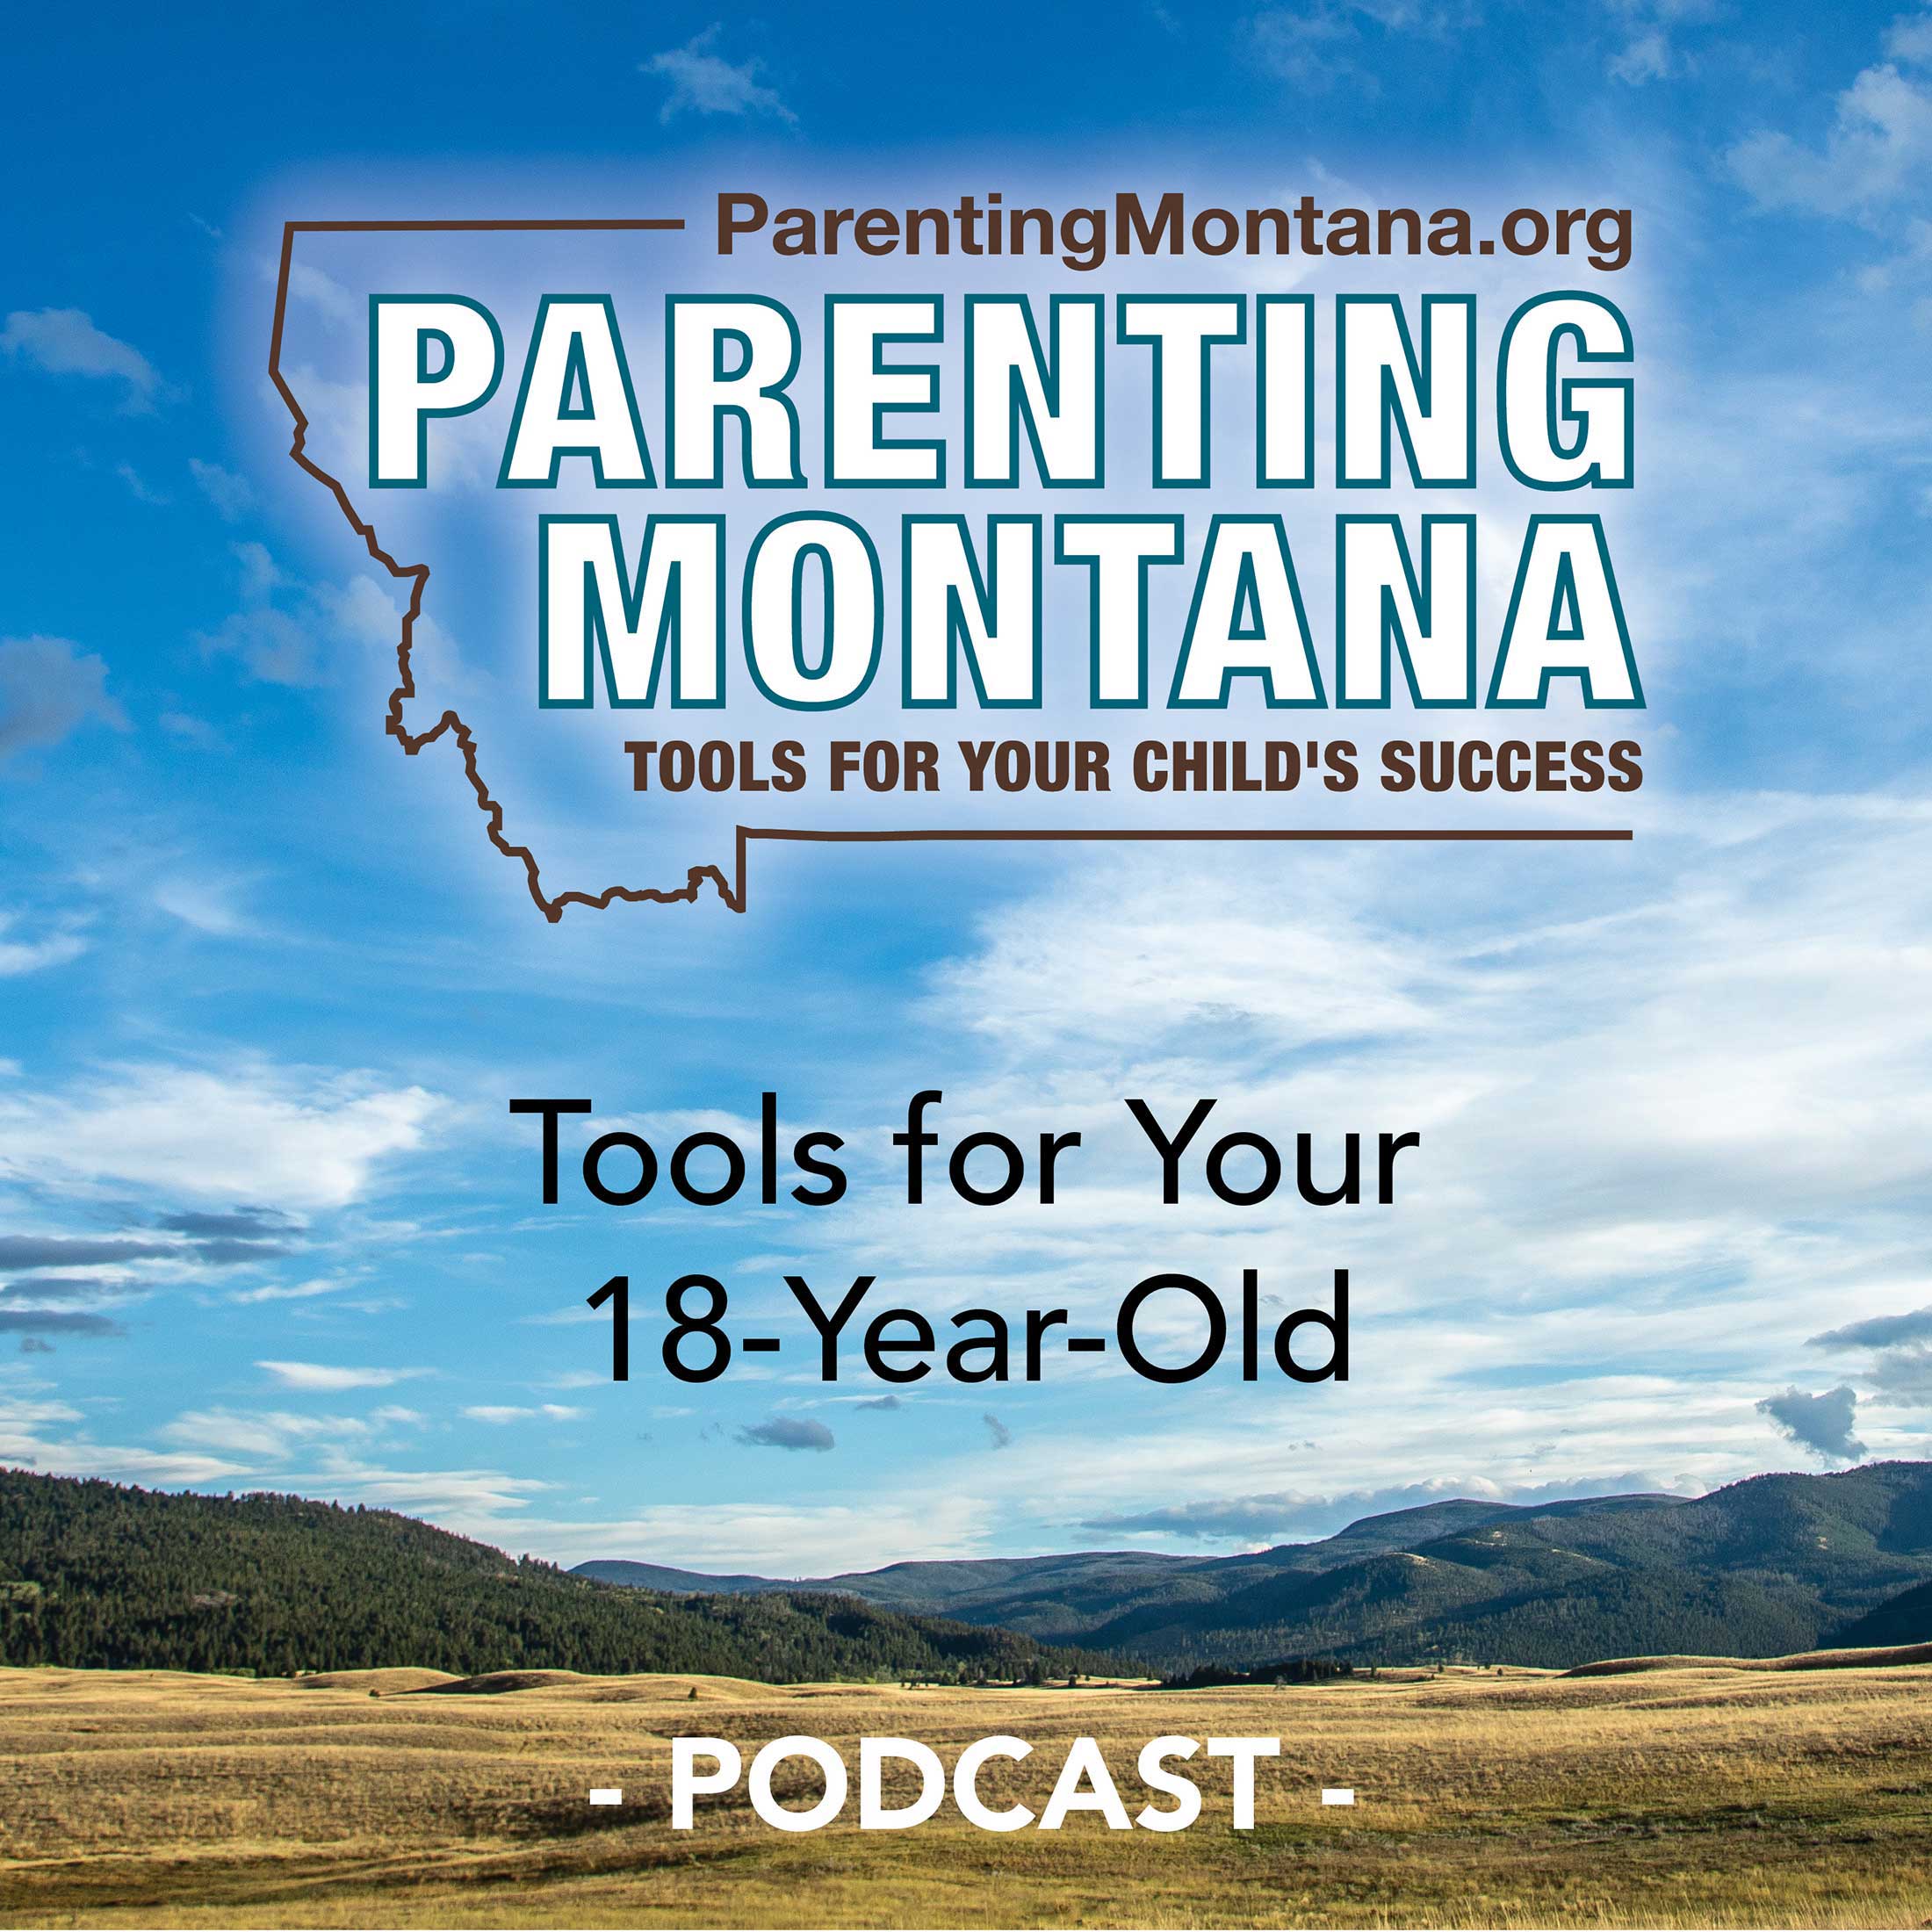 Artwork for podcast 18-Year-Old Parenting Montana Tools